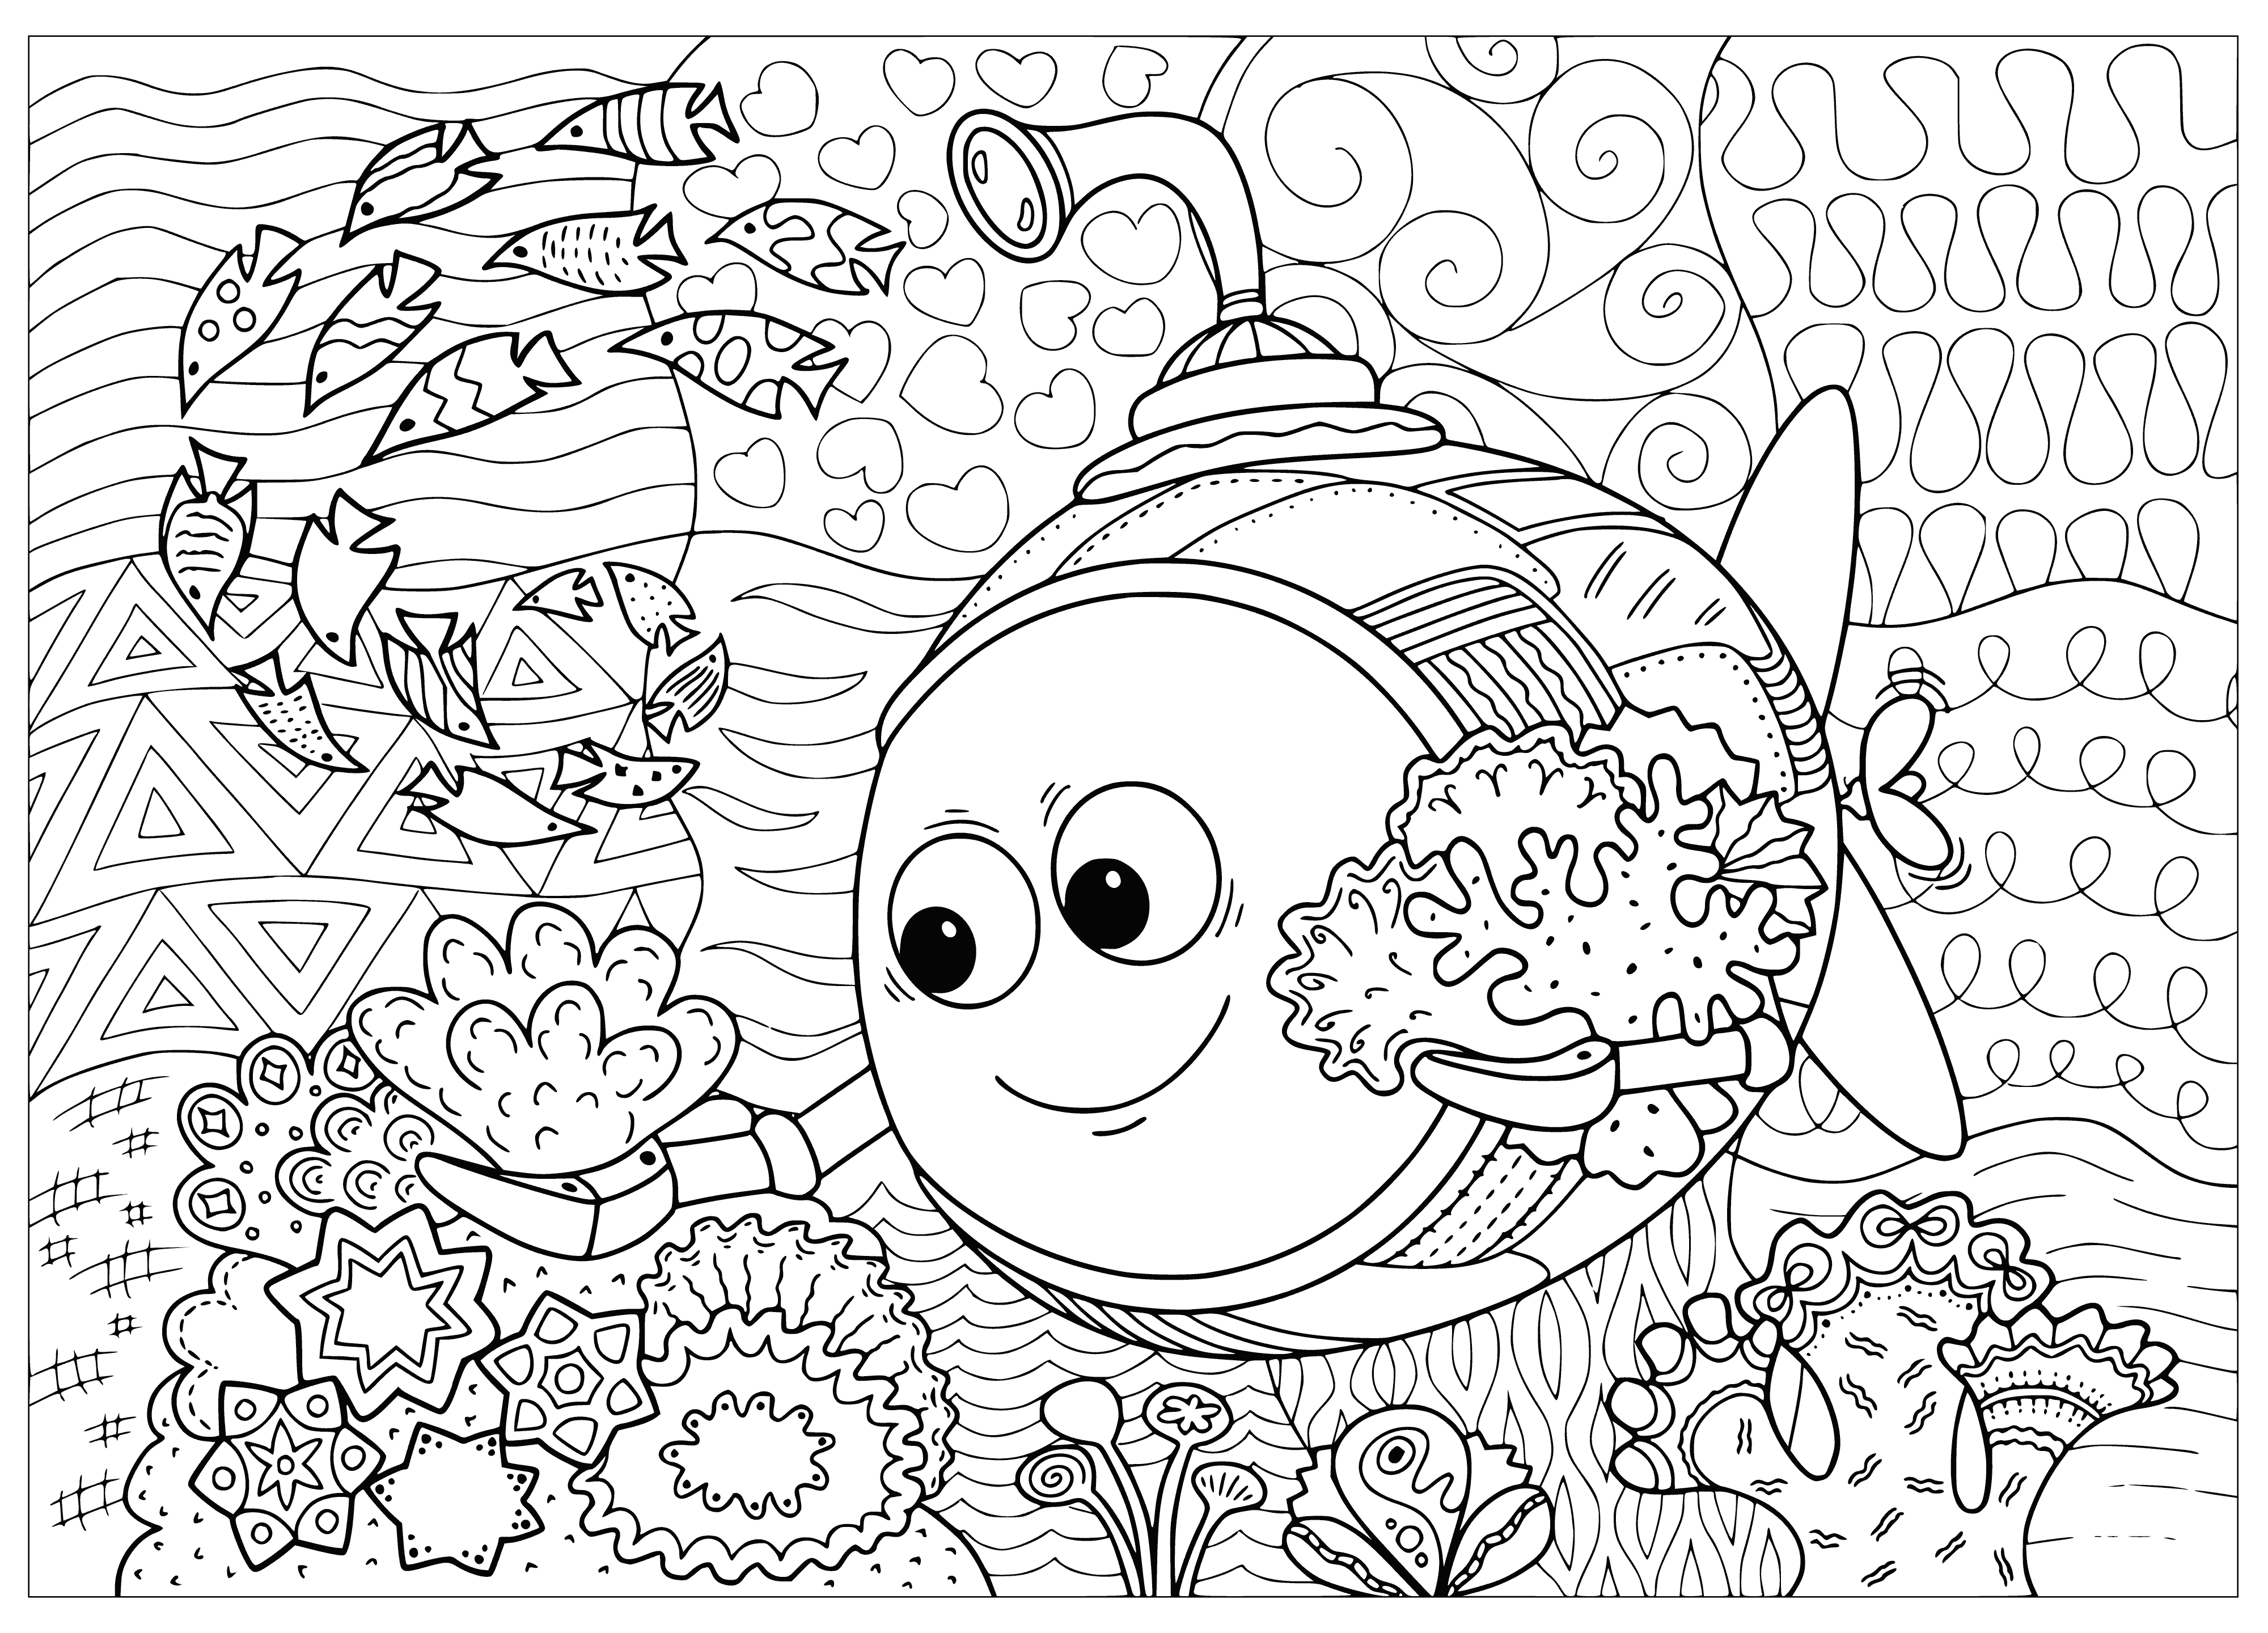 coloring page: Small yellow sub among bright coral & fish; helmeted occupant in blue suit searches the sea life through large round window.